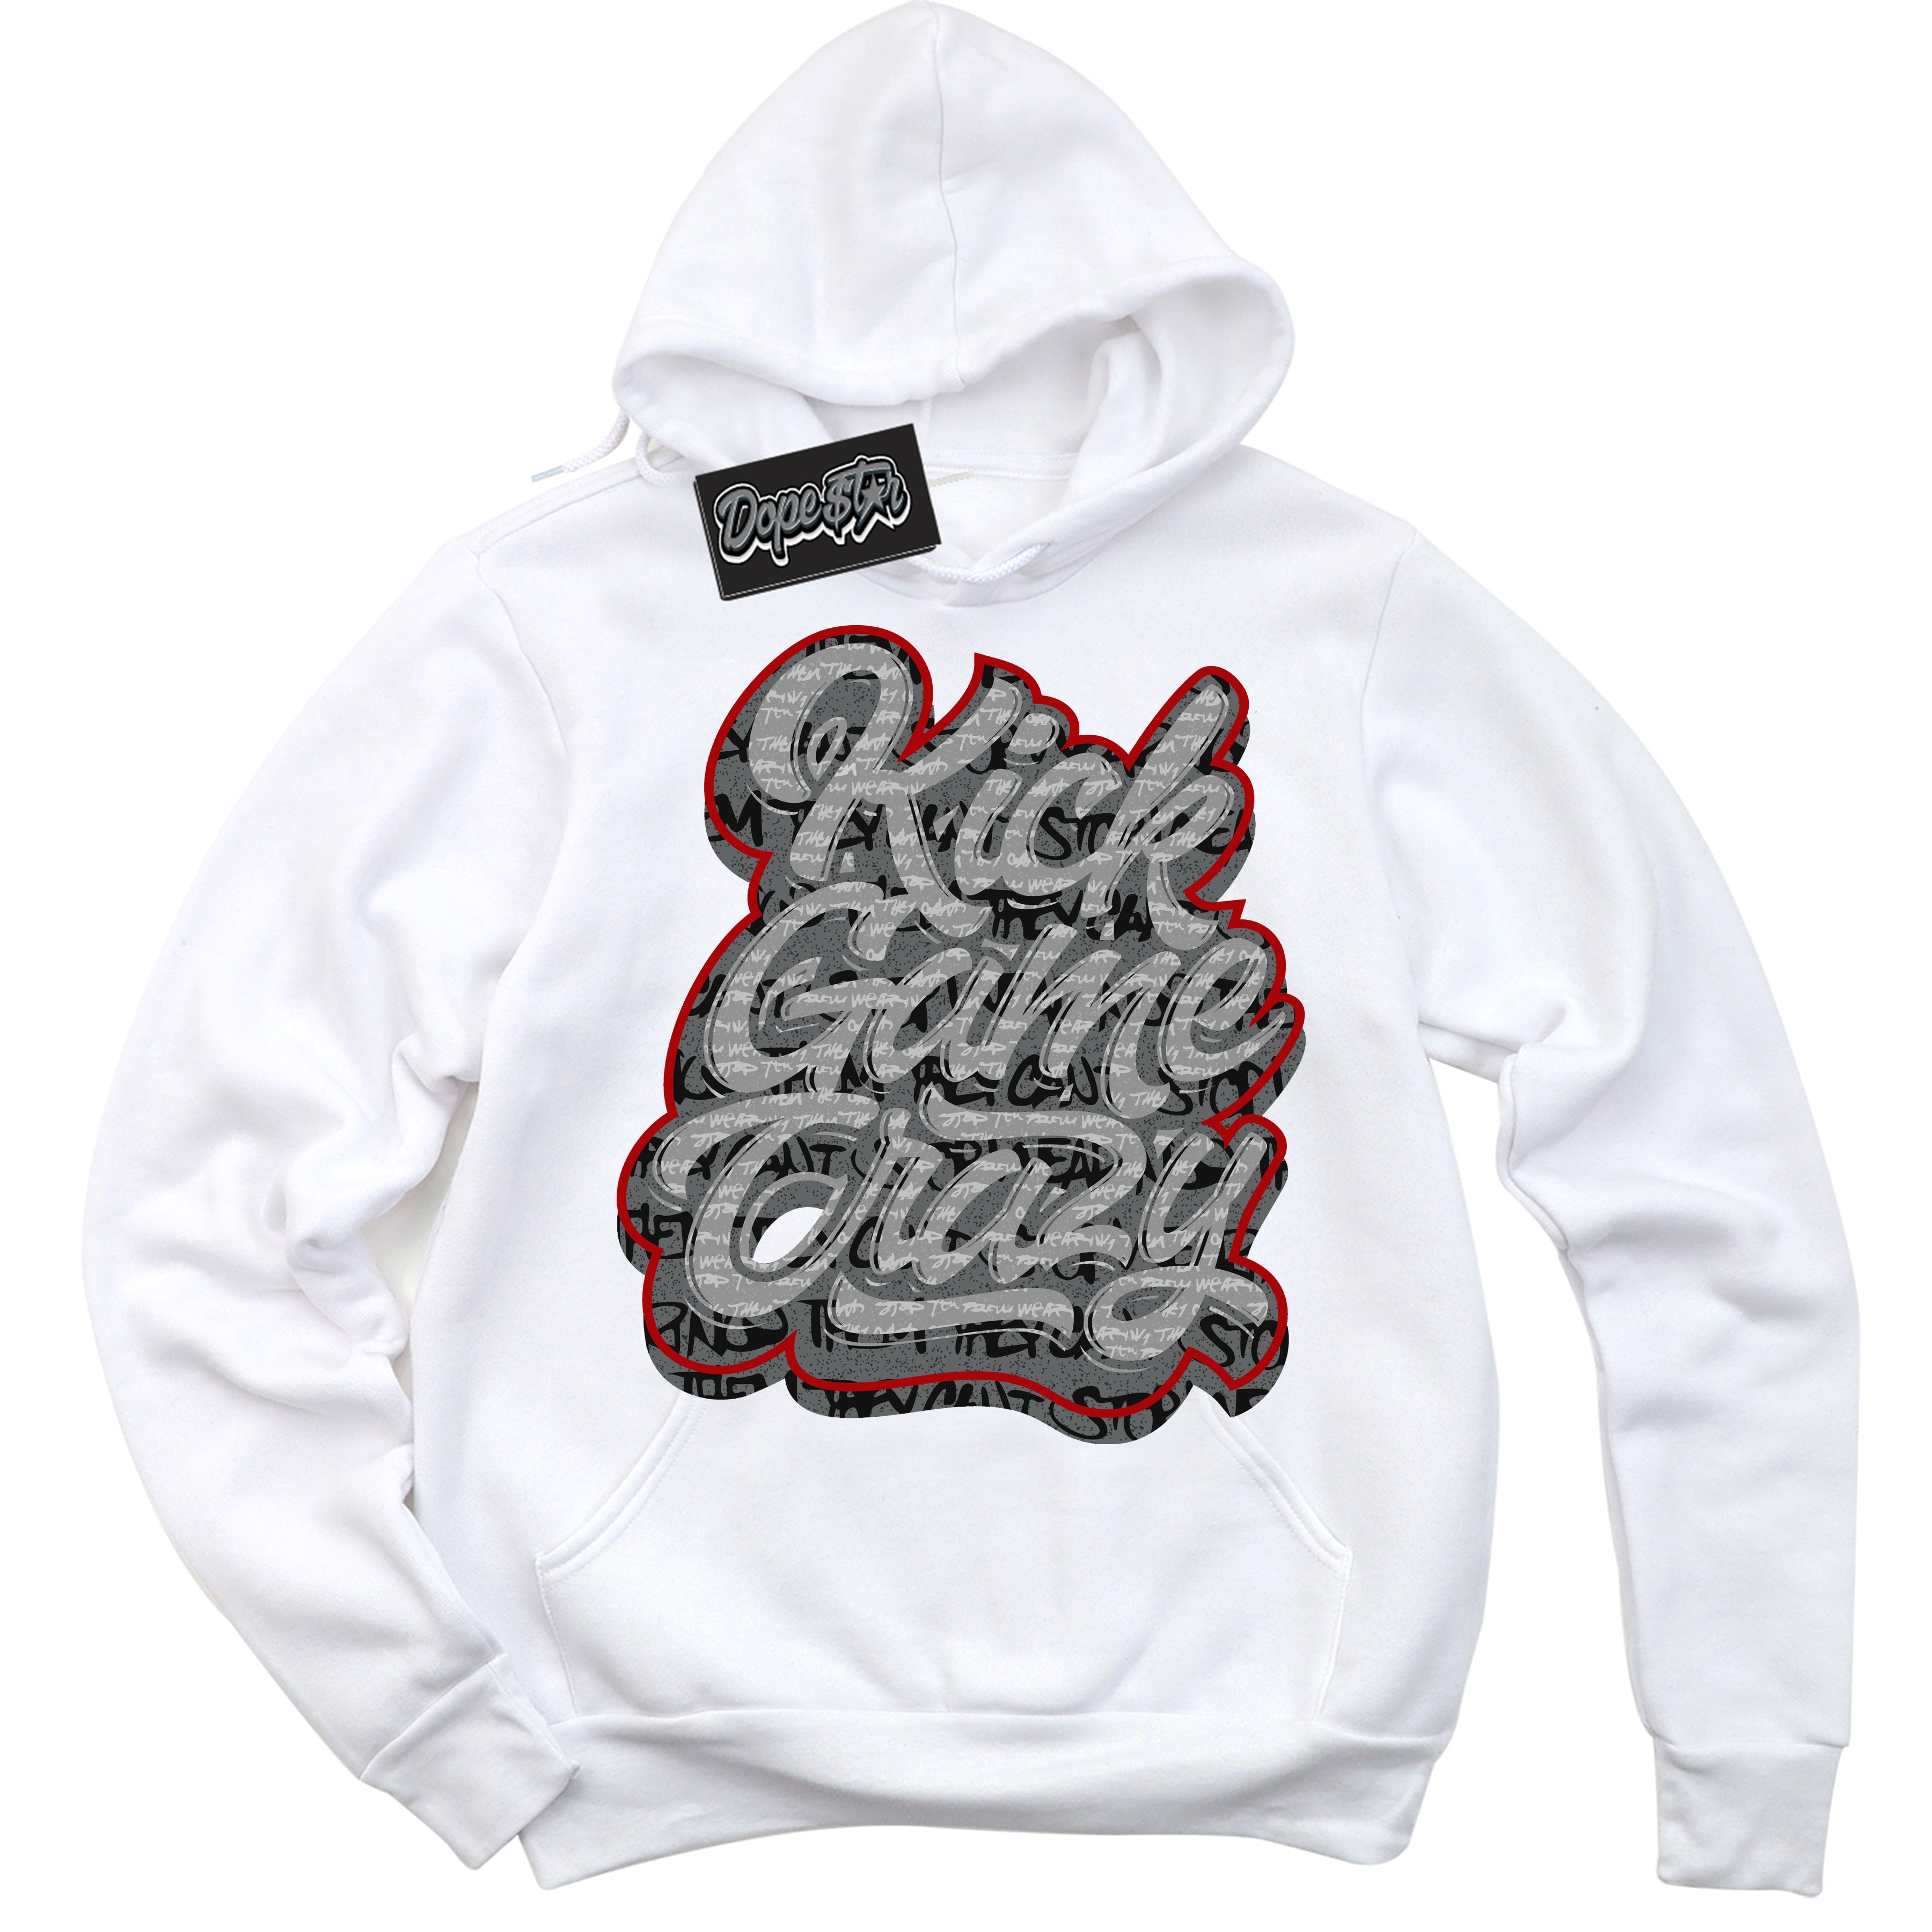 Cool White Hoodie with “ Kick Game Crazy ”  design that Perfectly Matches Rebellionaire 1s Sneakers.